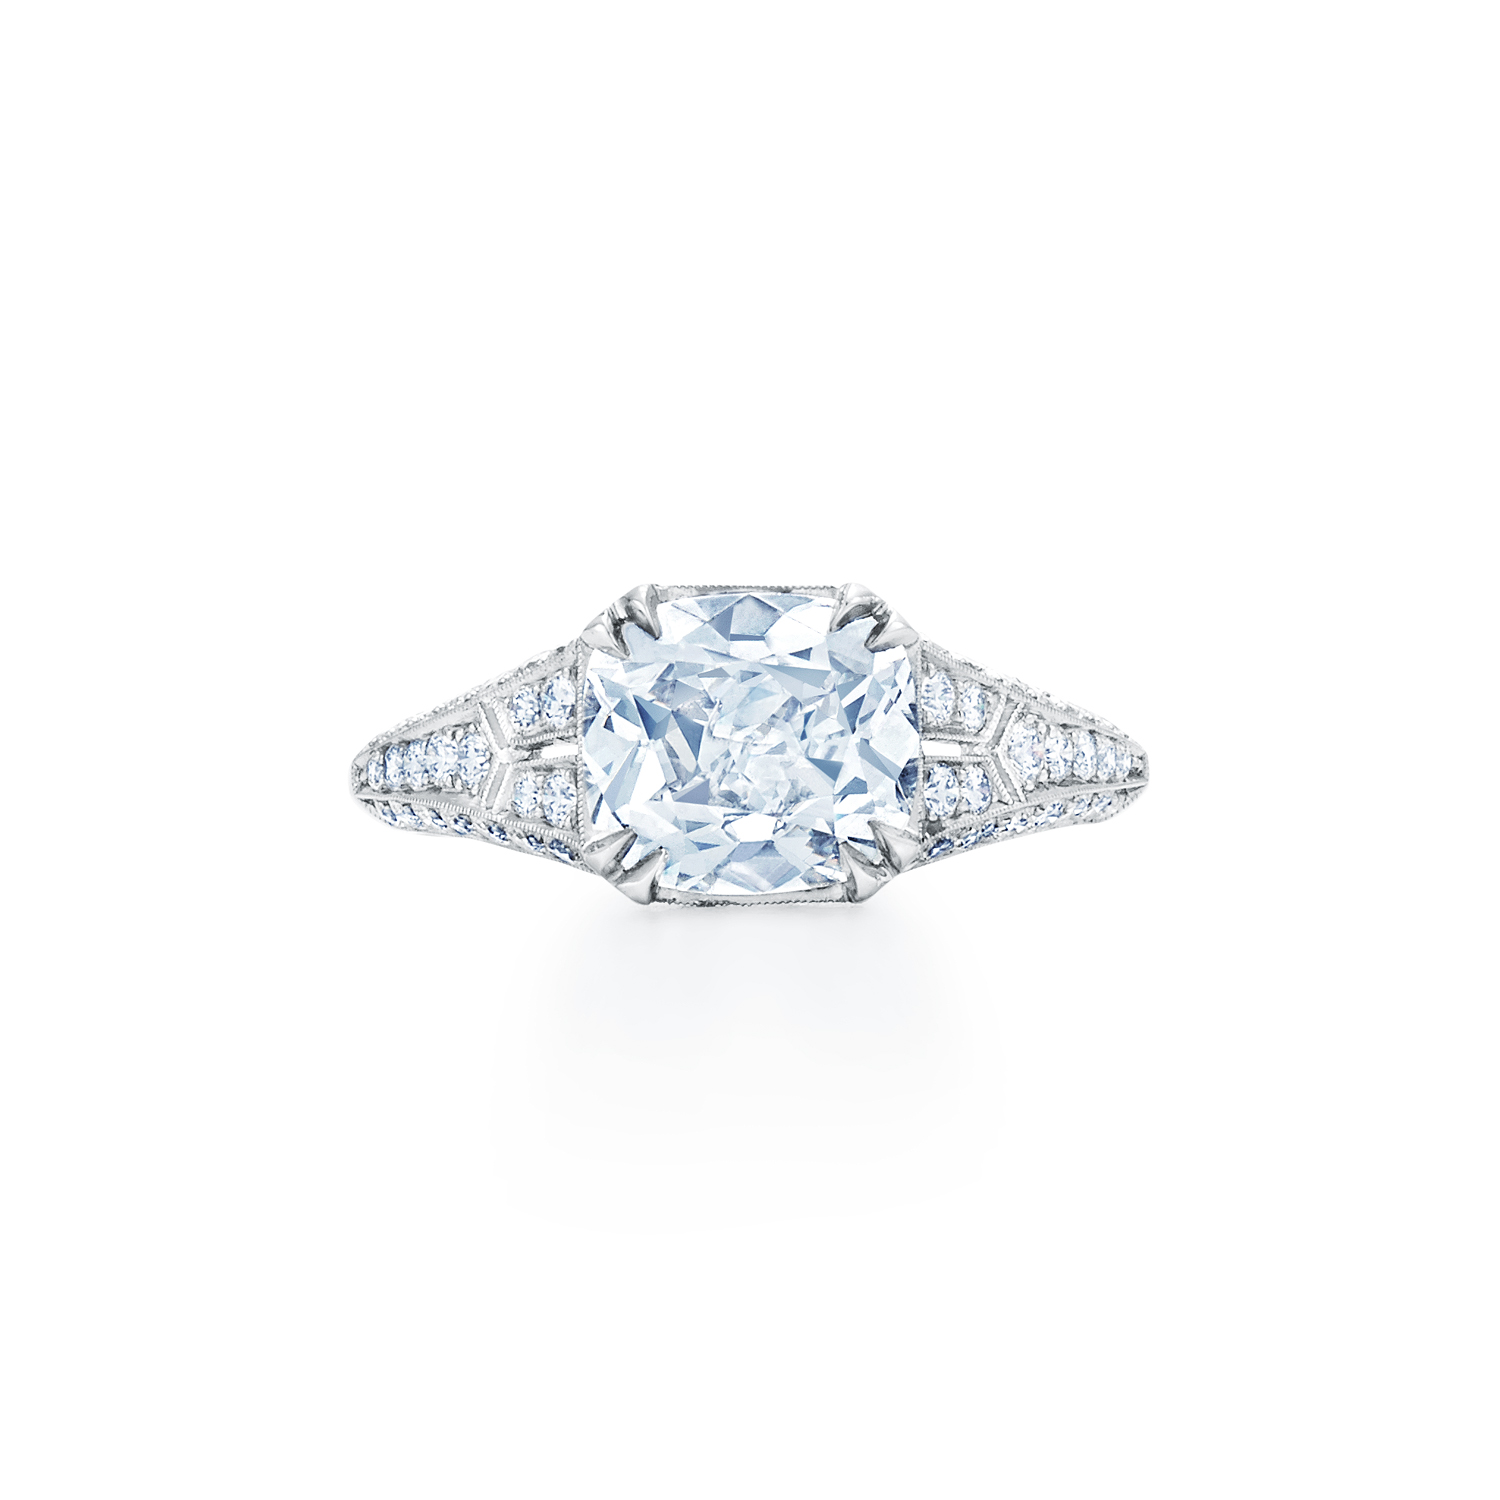 Cushion Diamond Engagement Ring in a Filigree Setting in Platinum, Style F-1014FLC-0-DIA-PLAT